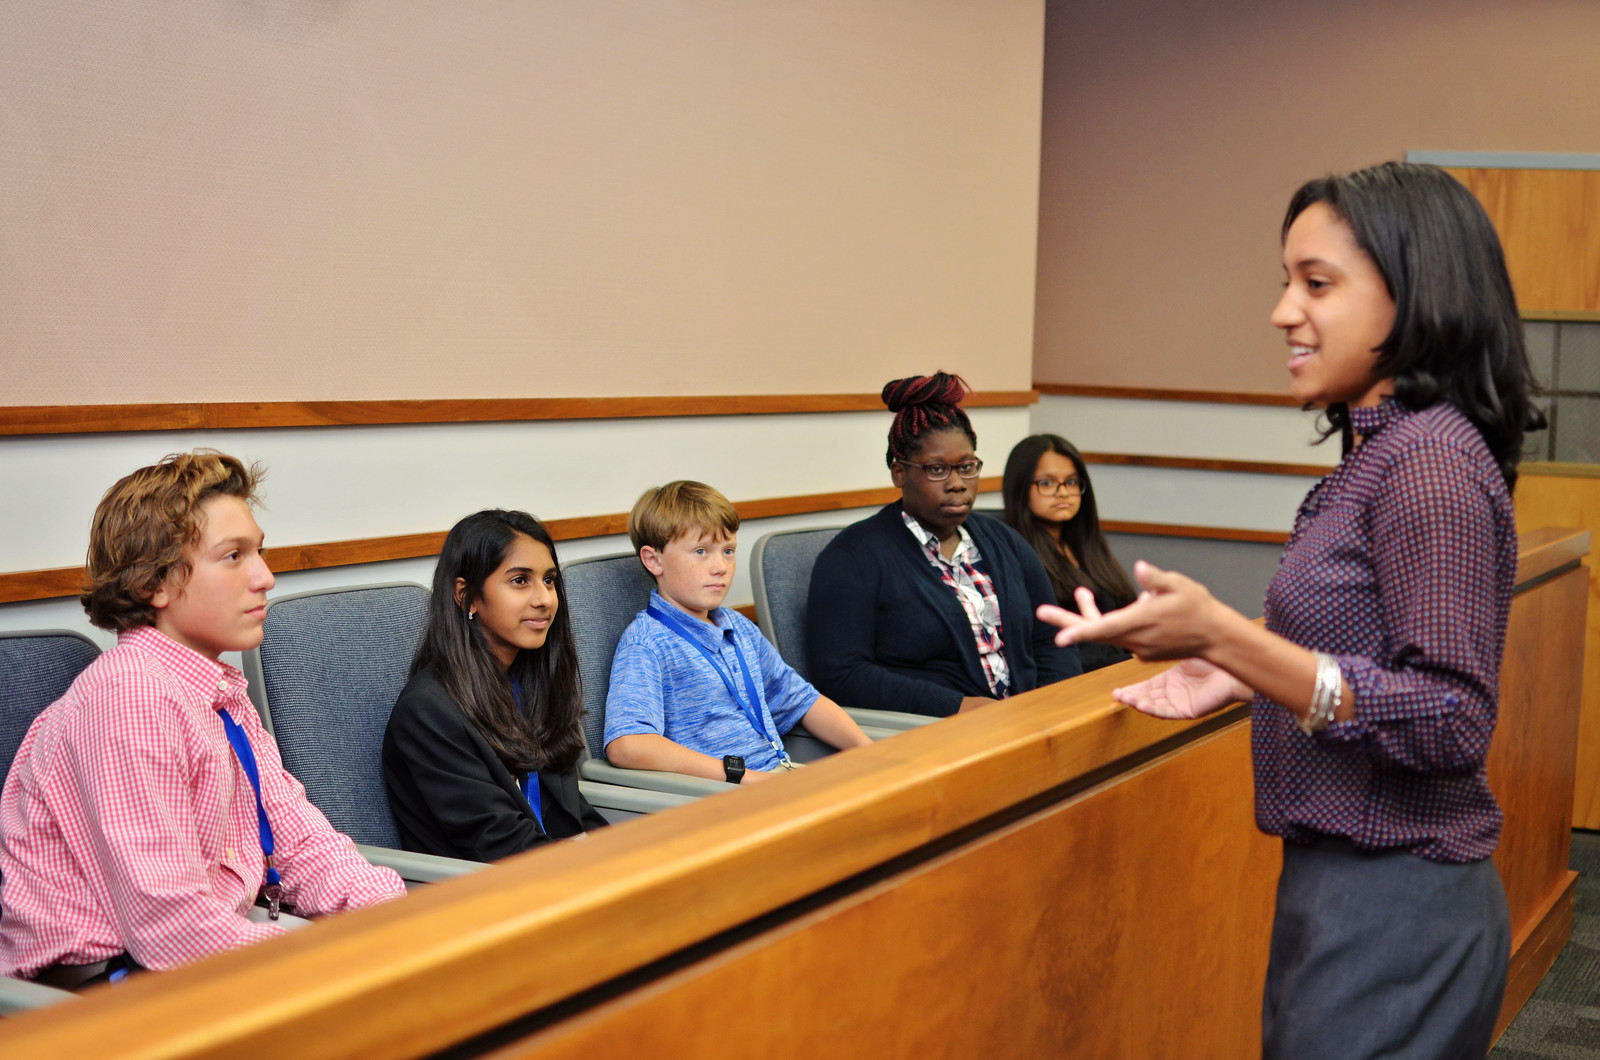 Teen Court is run by students so that defendants may be positively redirected by their peers. Photo courtesy of the Teen Court of Sarasota.